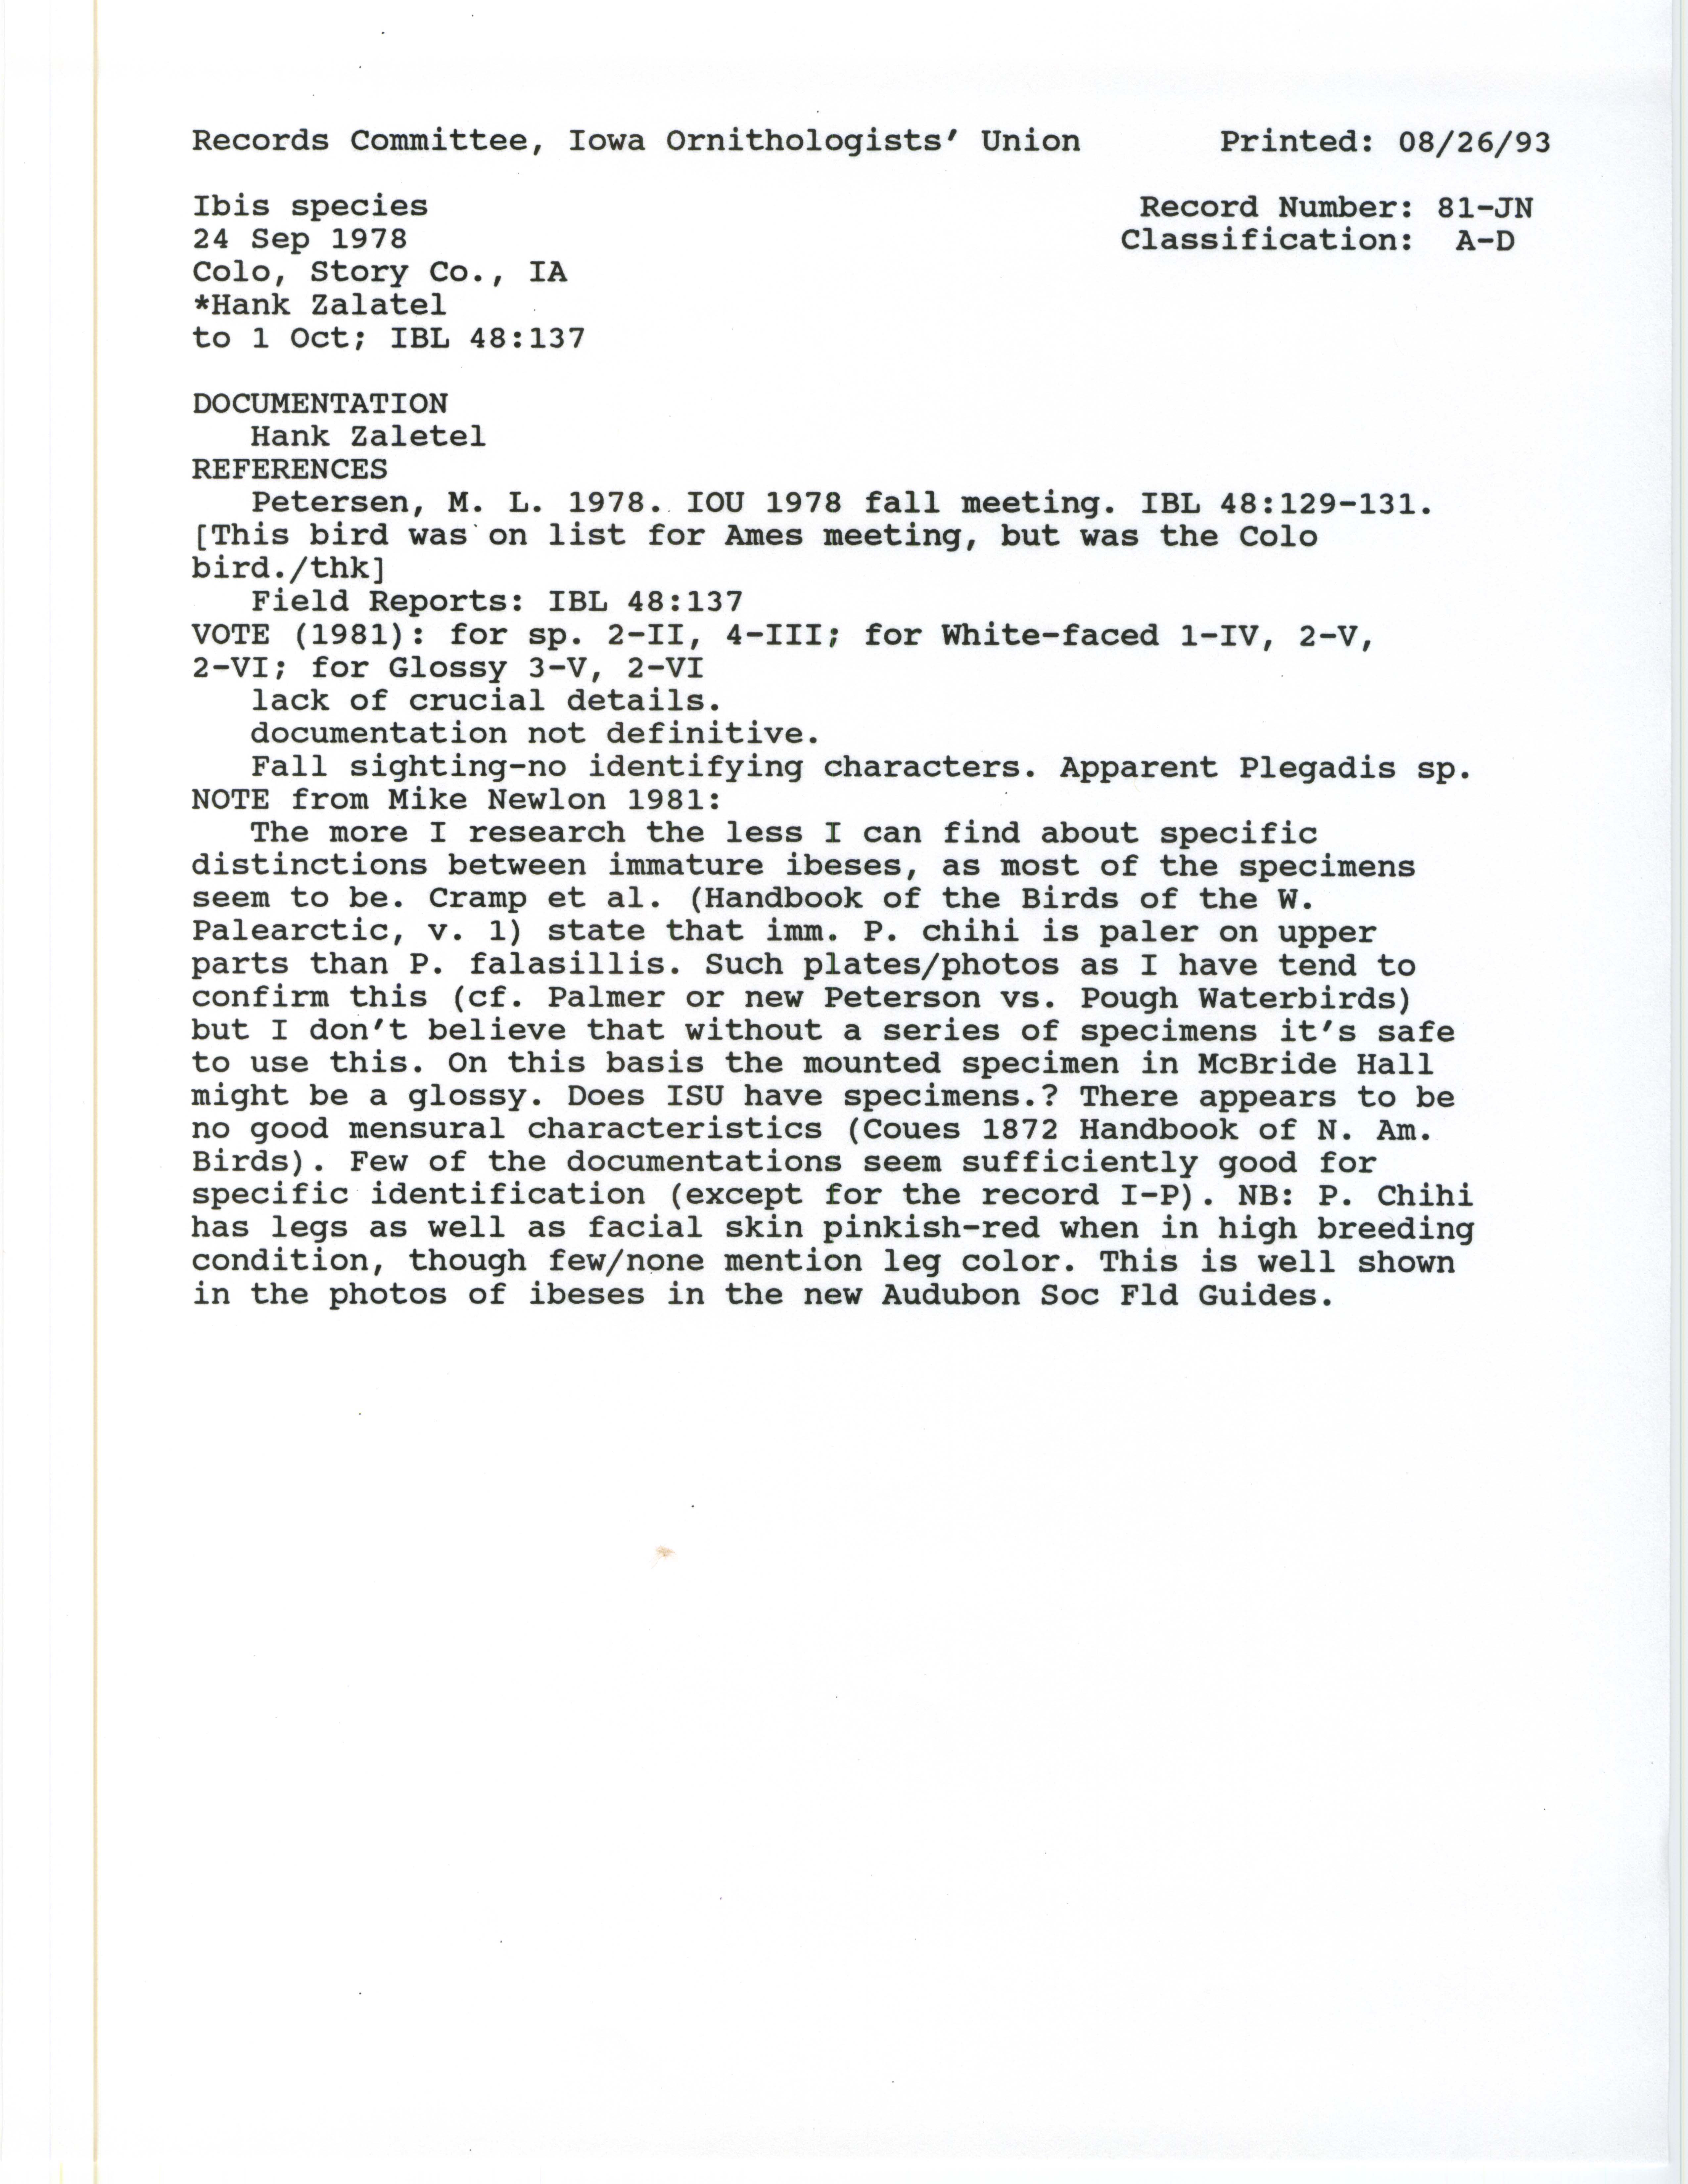 Records Committee review for rare bird sighting of Ibis species at Colo, 1978